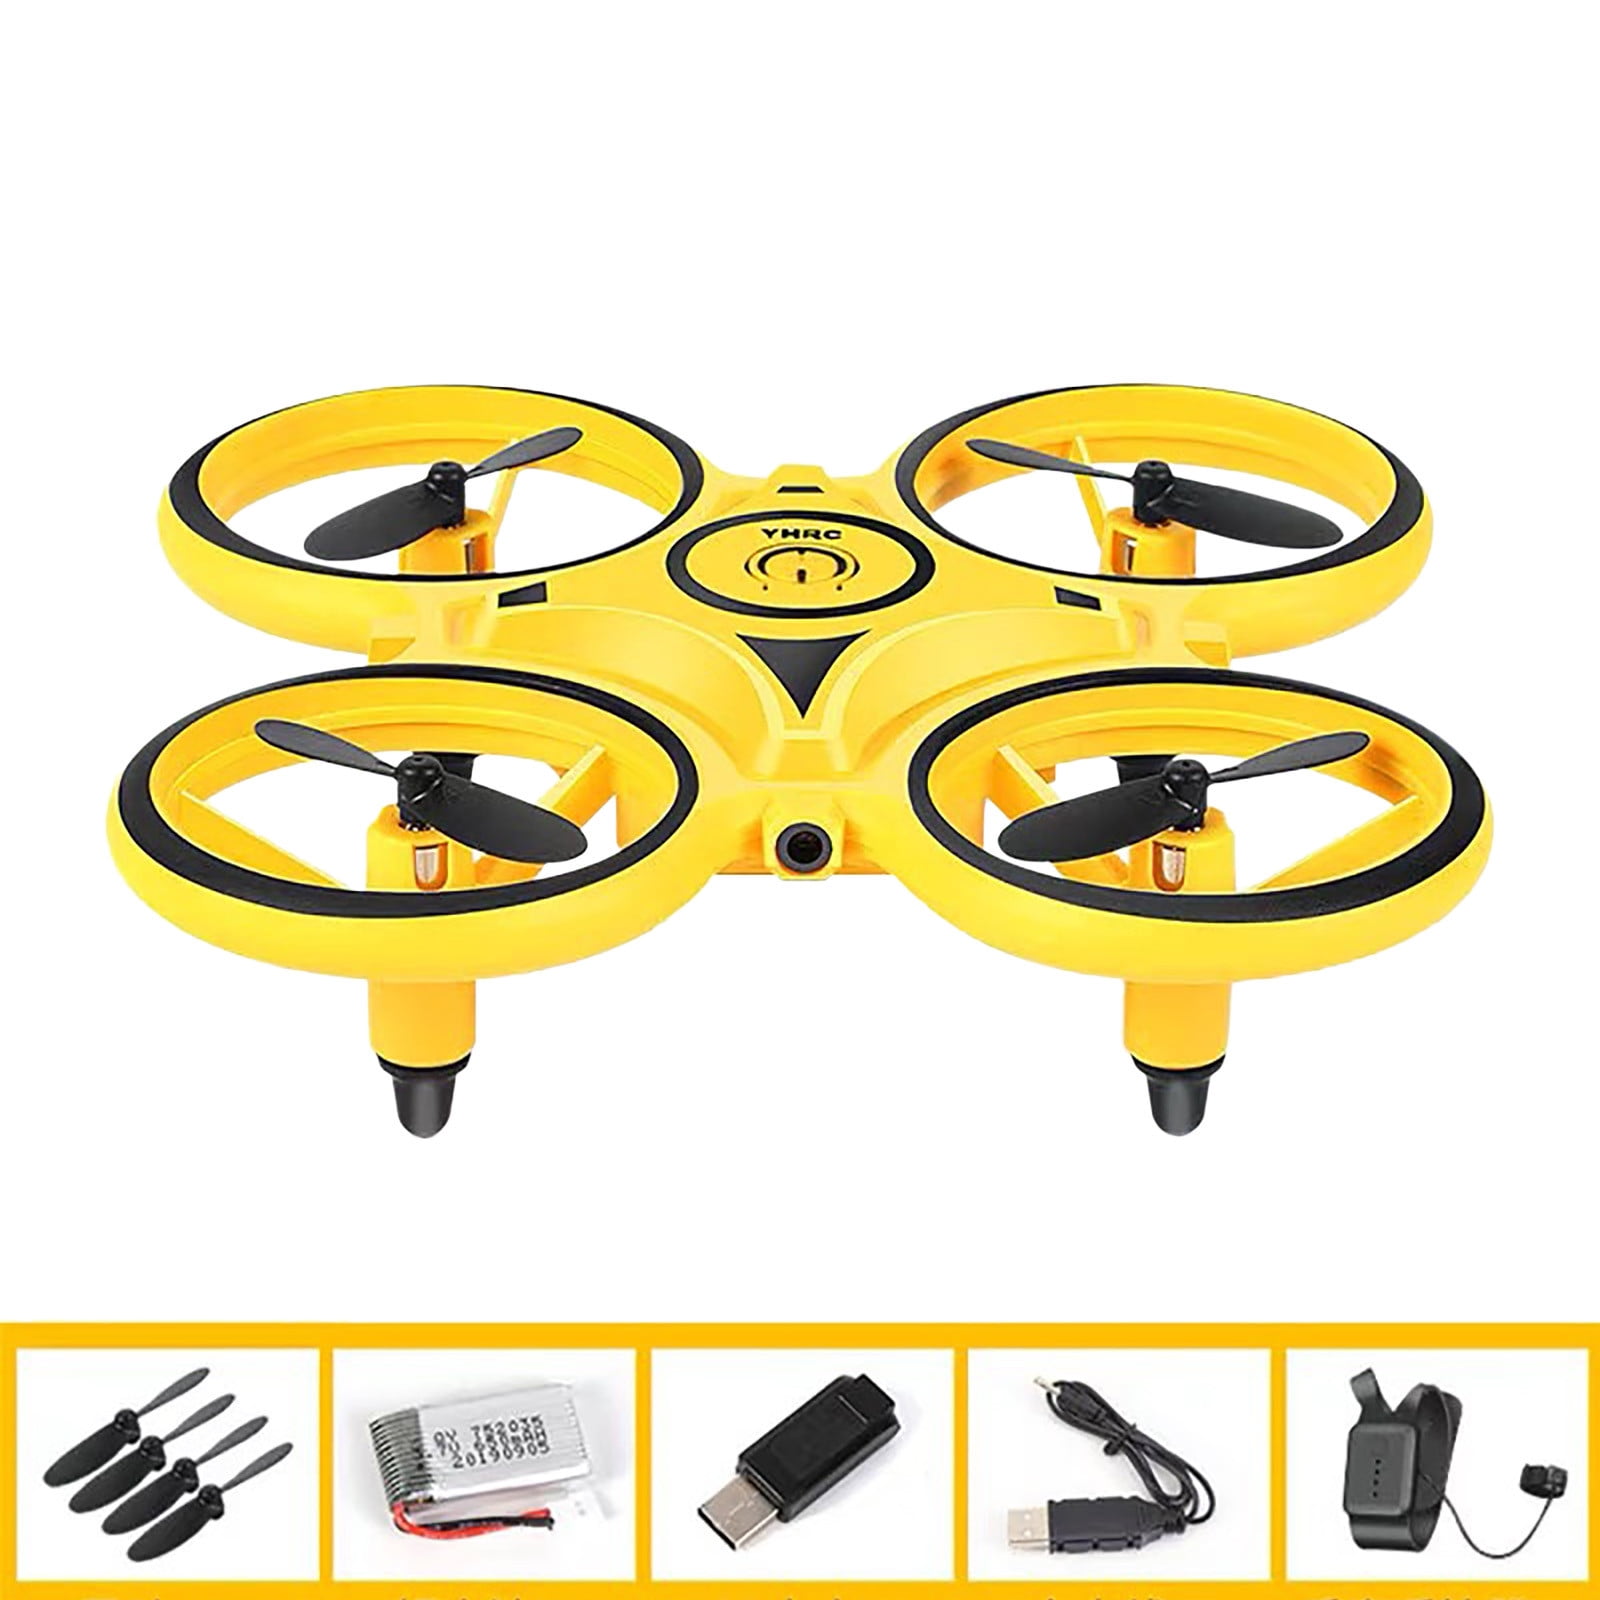 New Firefly Drone Hand Control Toy Quadcopter Free Shipping Best Hand Gesture 